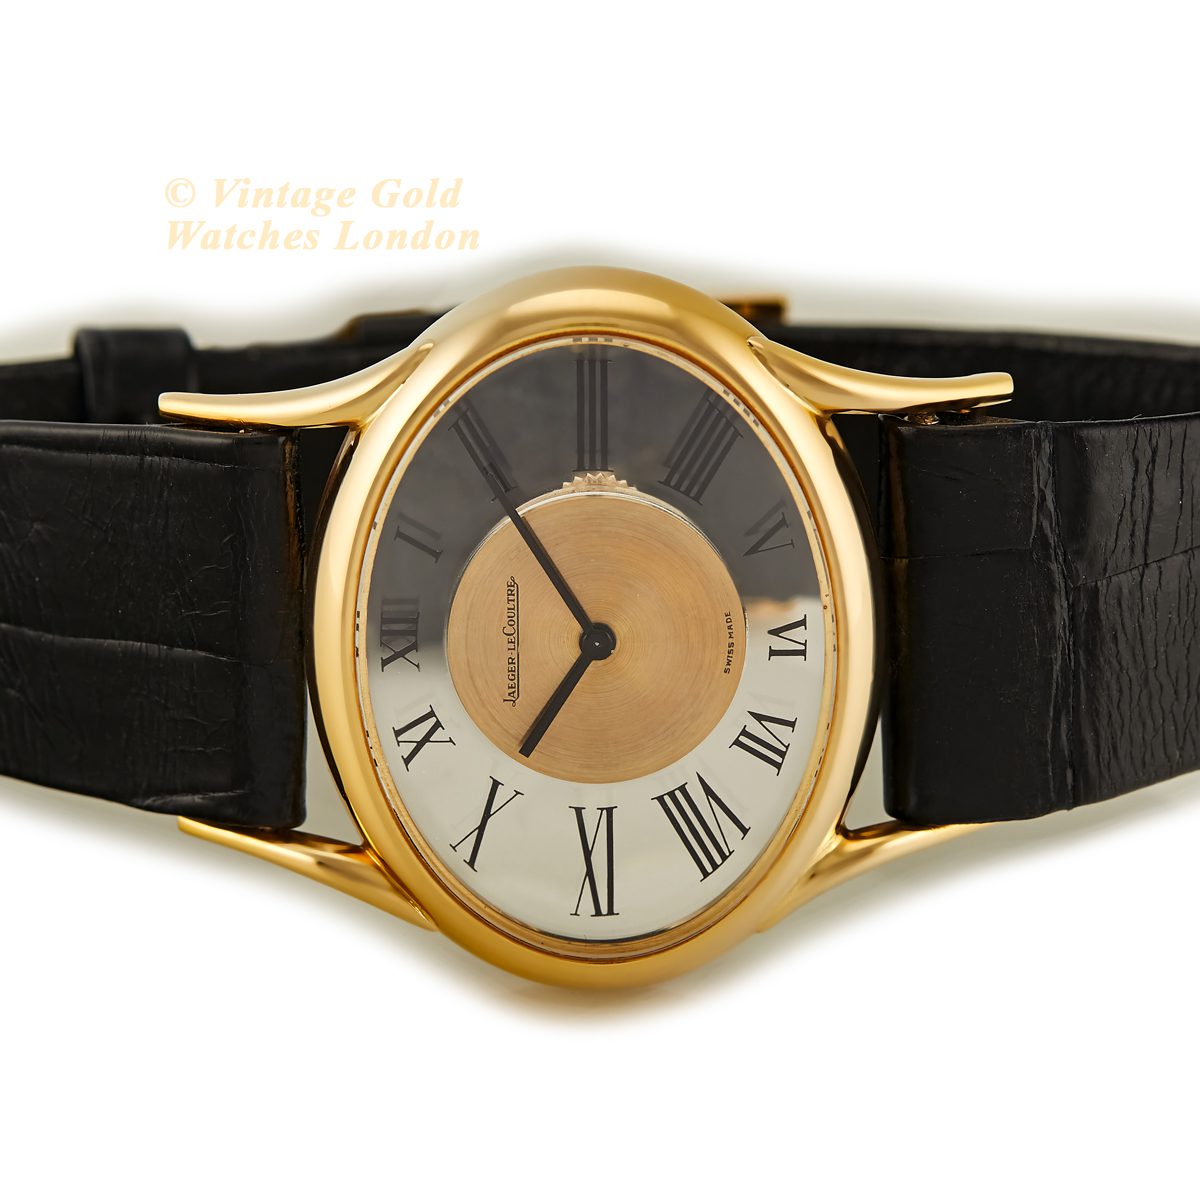 Jaeger-LeCoultre Model 17011 18ct Mystery Watch 1971 | Vintage Gold Watches